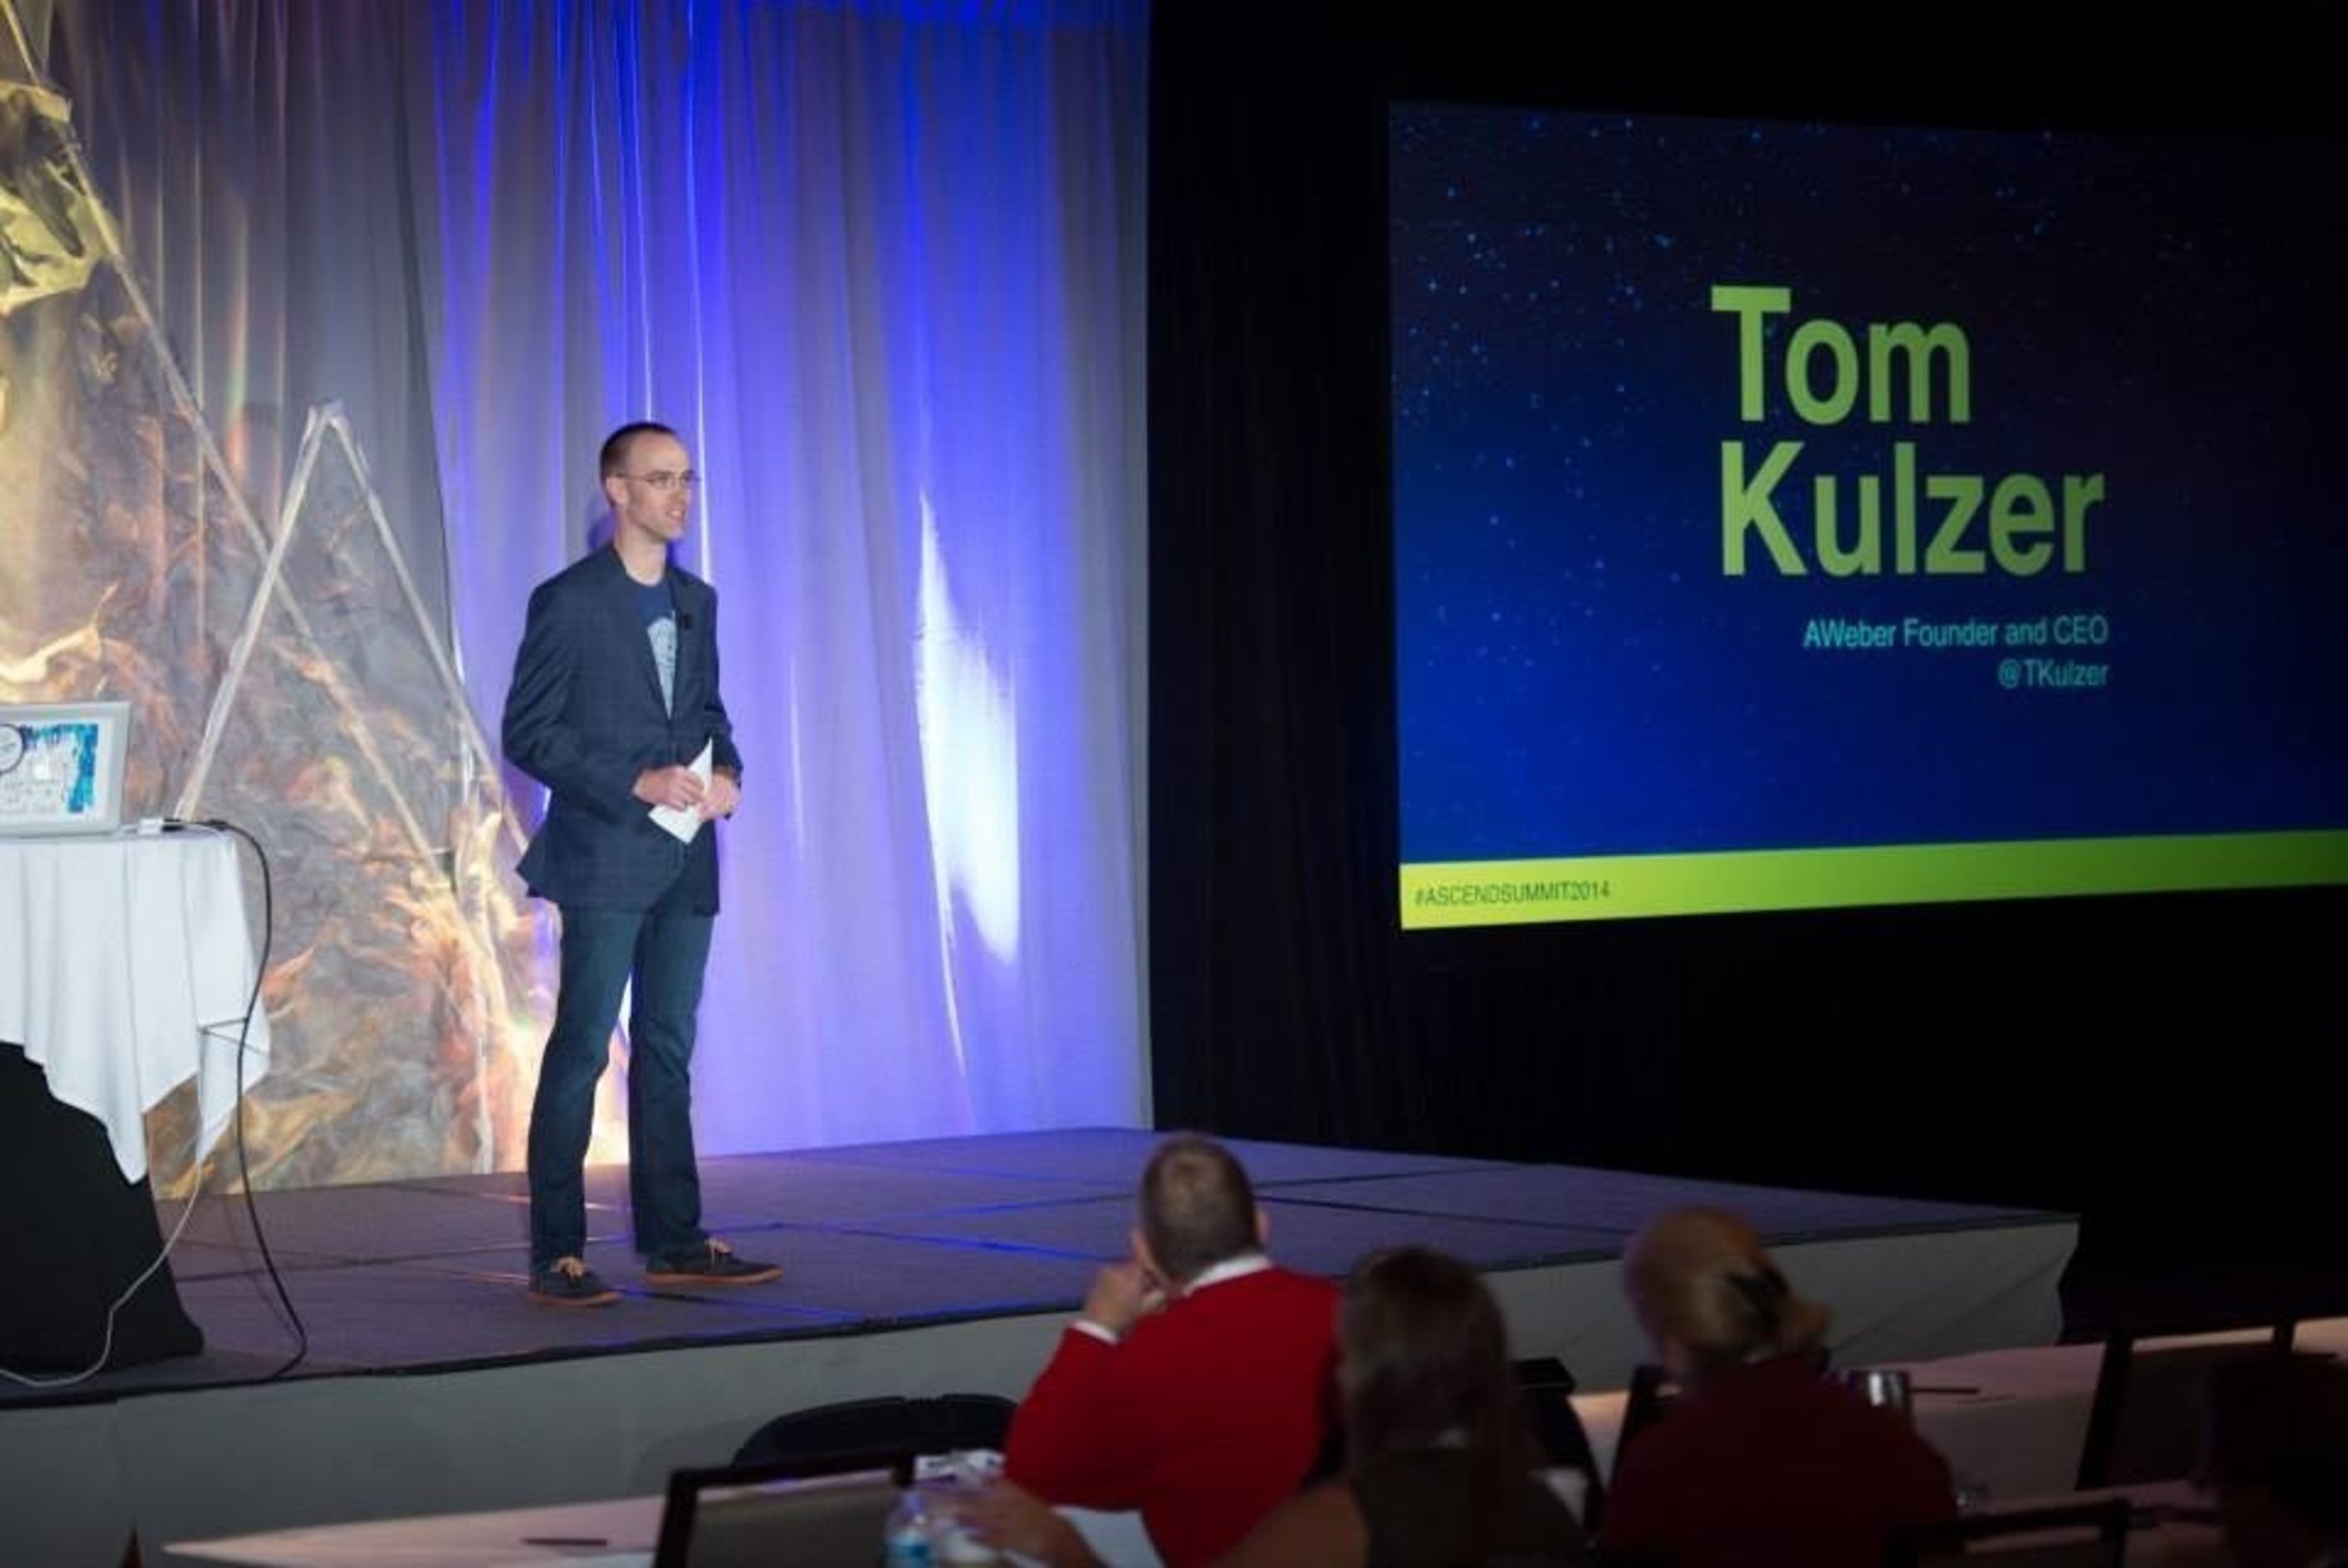 AWeber Founder and CEO Tom Kulzer welcomes attendees to ASCEND Digital Marketing Summit 2014